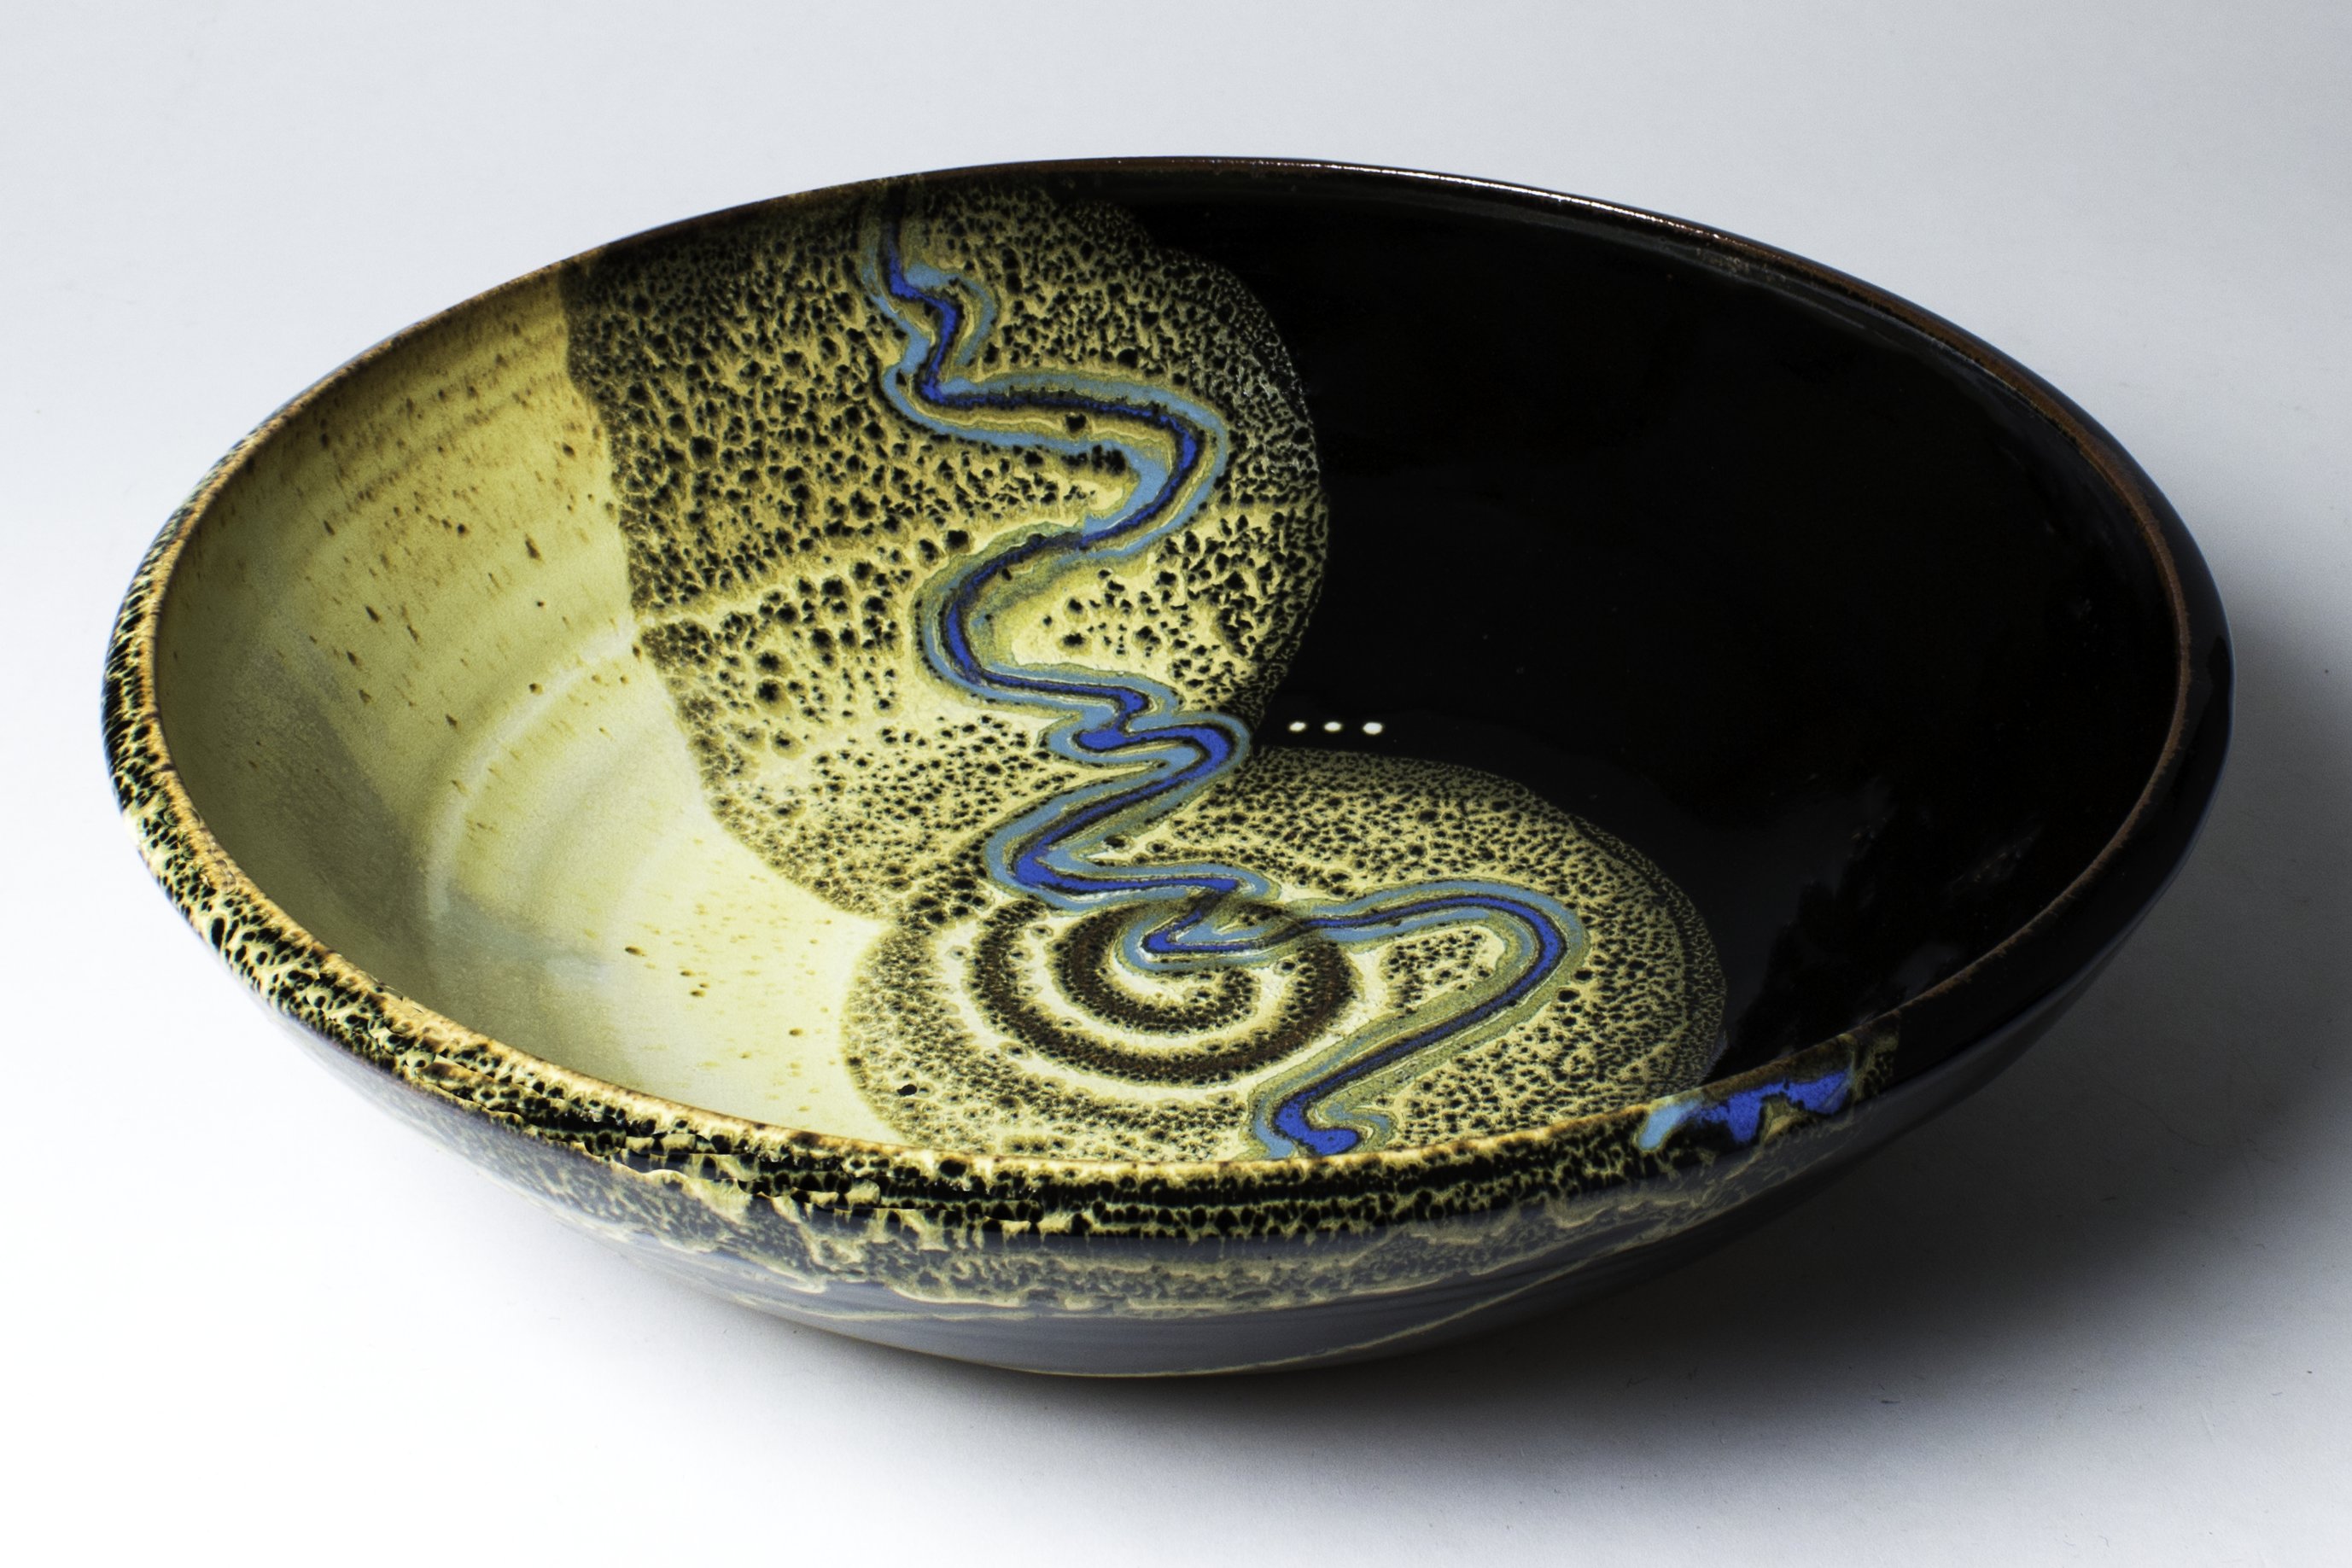 Smith grinds her own glazes from locally available minerals. Her primary ingredients include silica, feldspar, talc, red iron oxide and cobalt. This piece is glazed in her 'Yellow-stone' pattern